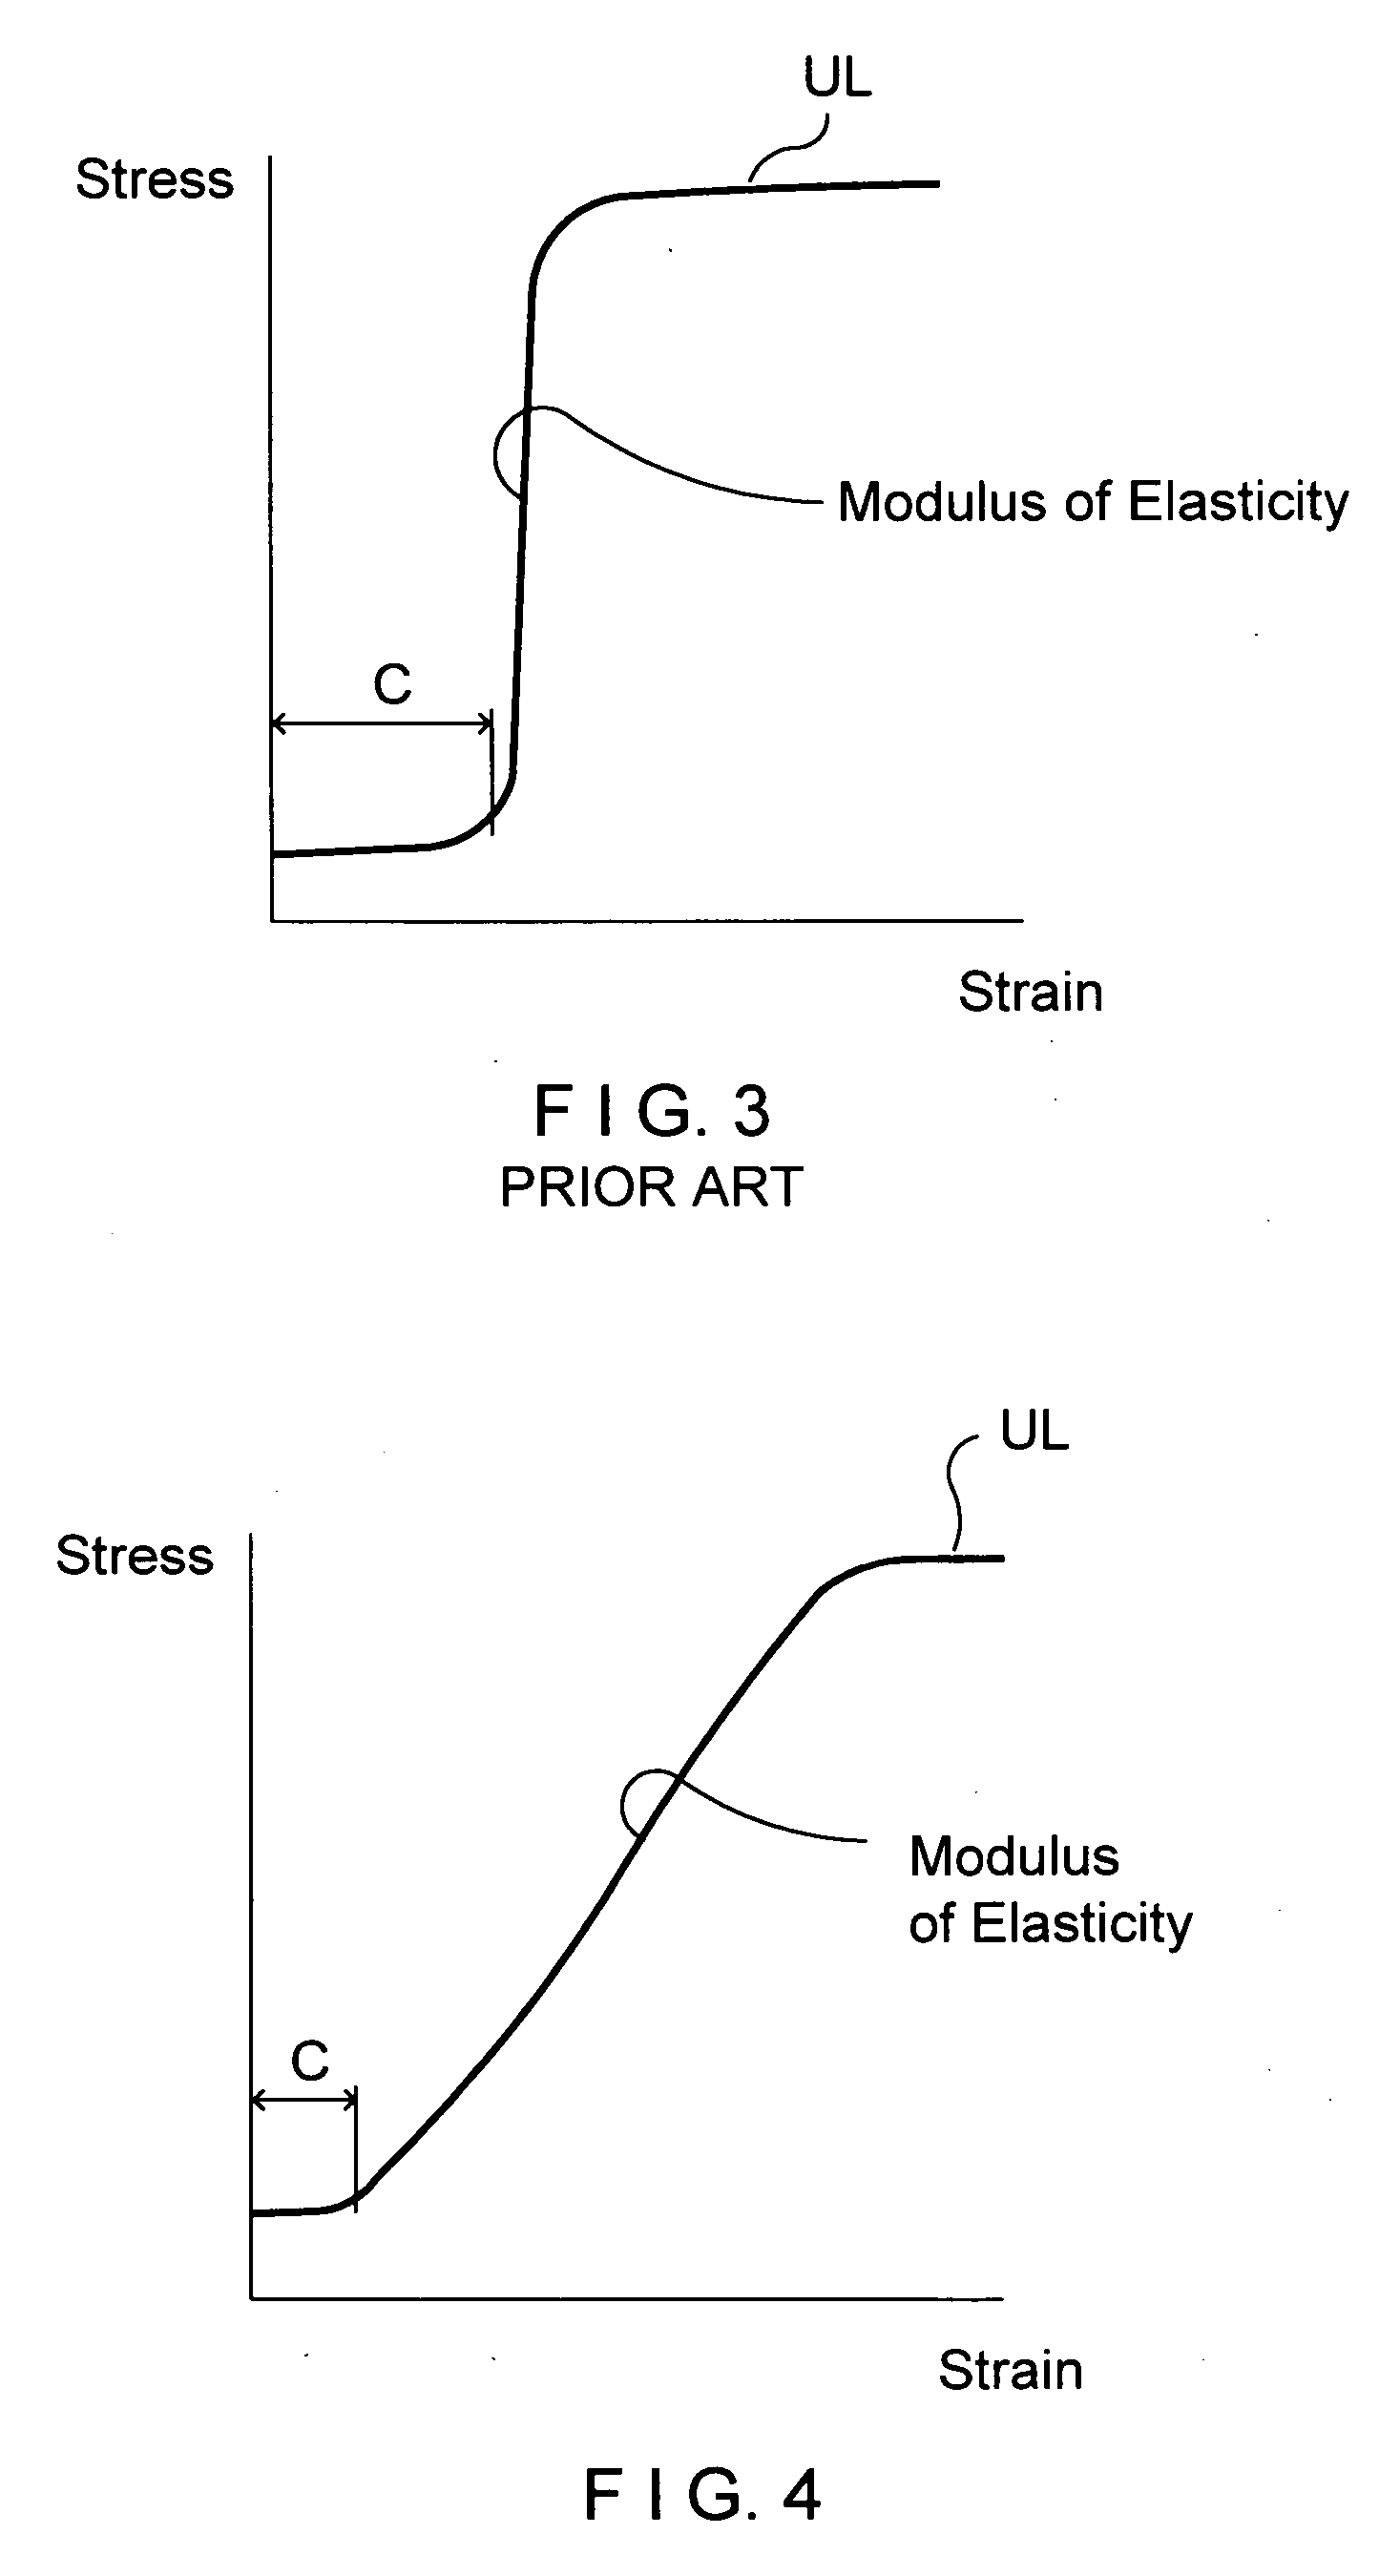 Bearing plate for use in fracture fixation having a spherical bearing hole with yielding expandability